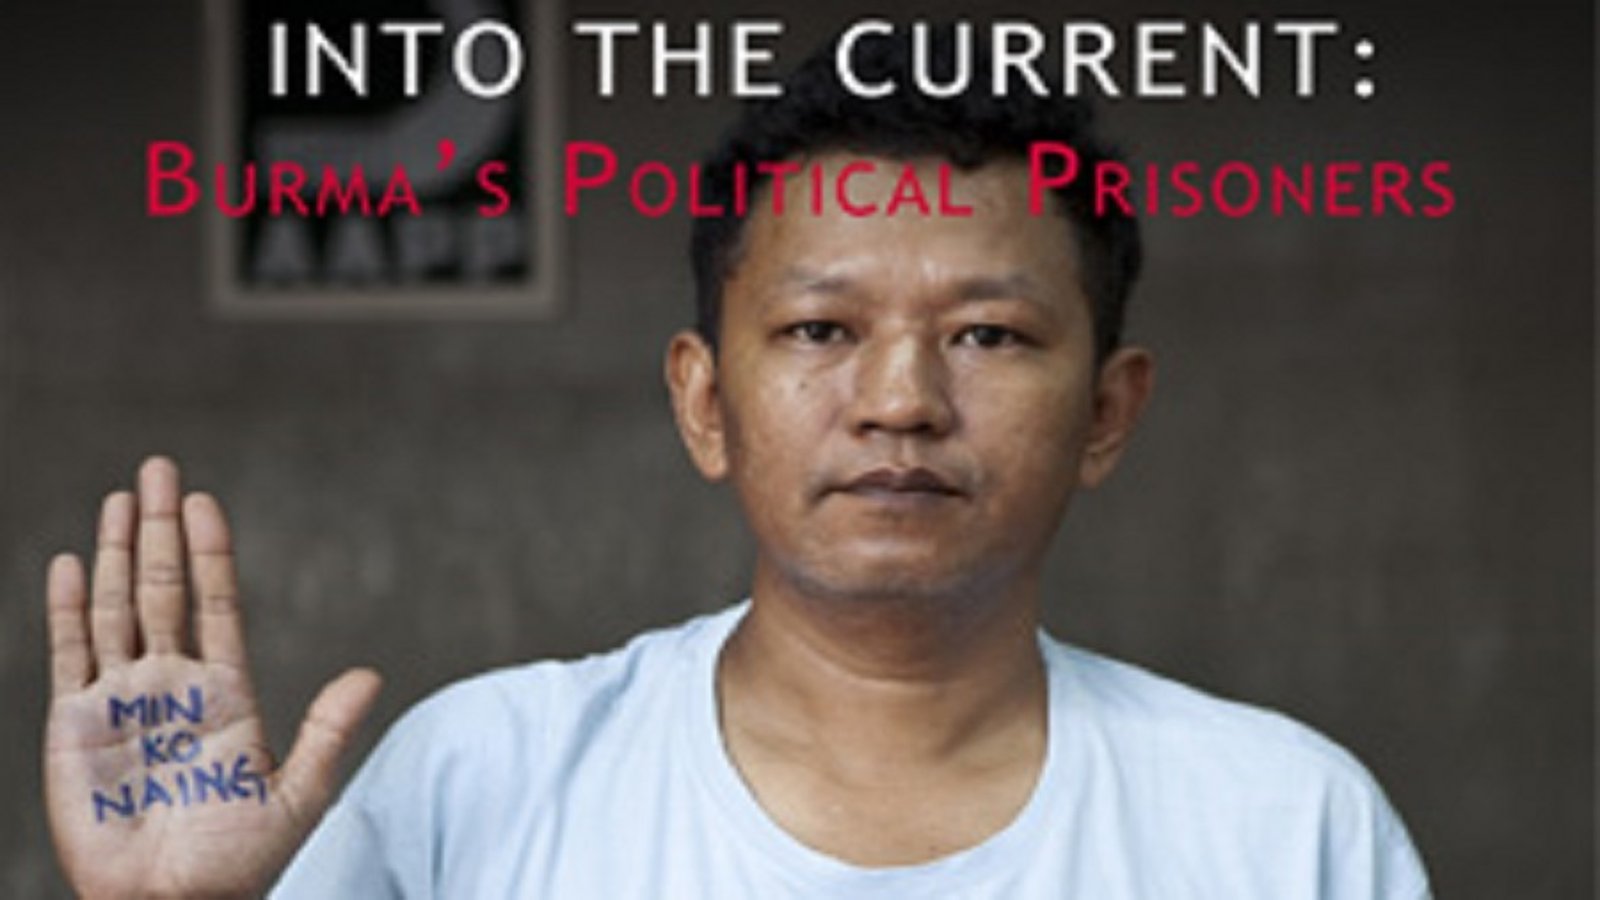 Into the Current - Burma's Political Prisoners